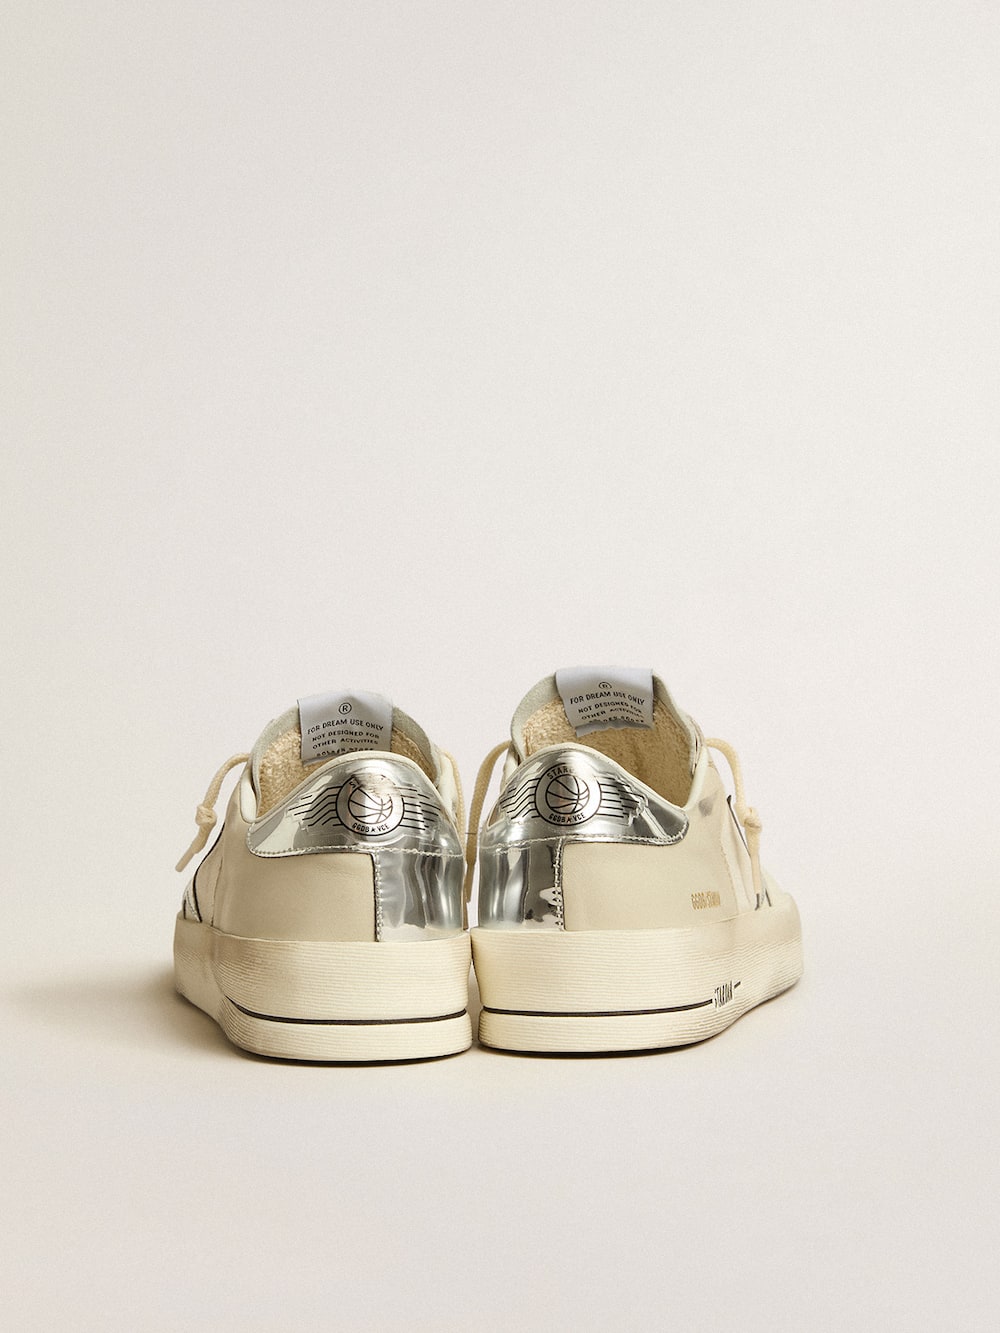 Golden Goose - Men's Stardan in nappa leather with silver mirror-effect star and heel tab in 